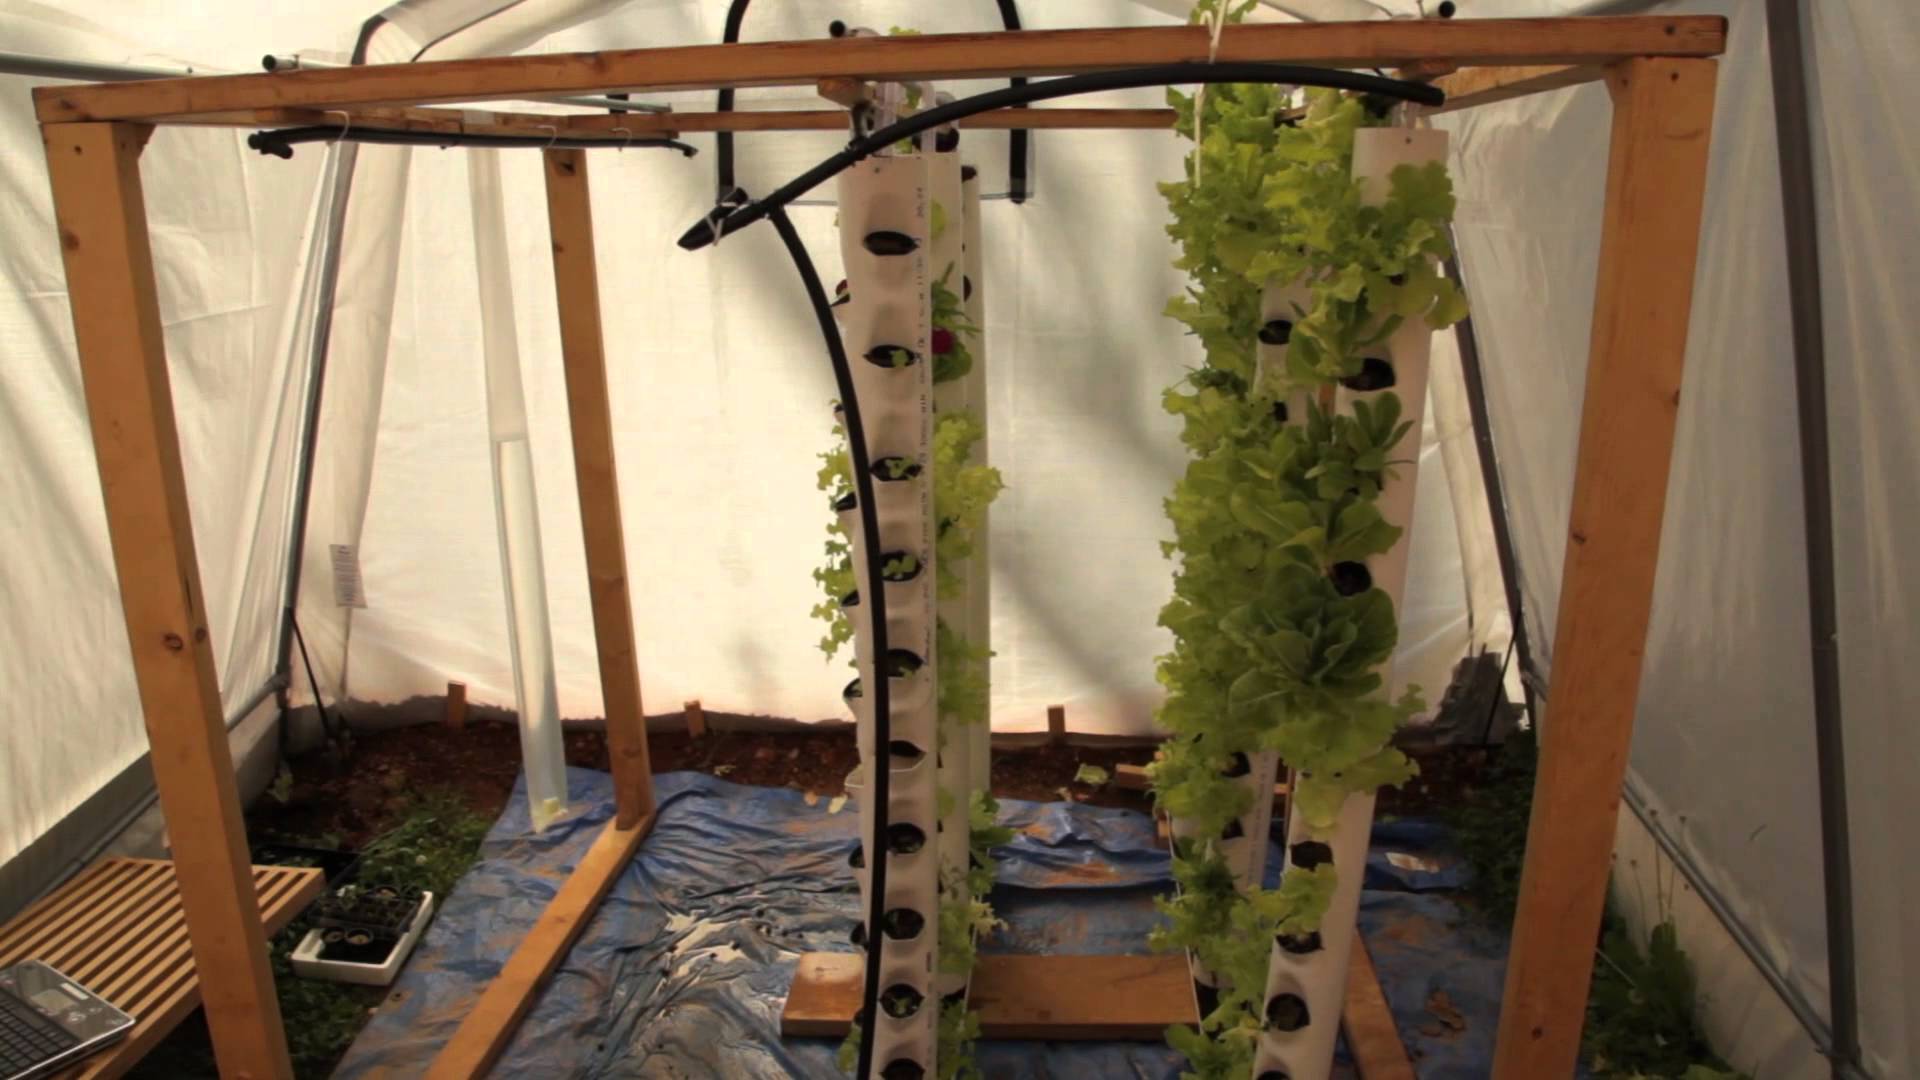 How To Build A Vertical Growing Tower For Aquaponics Or Hydroponics...